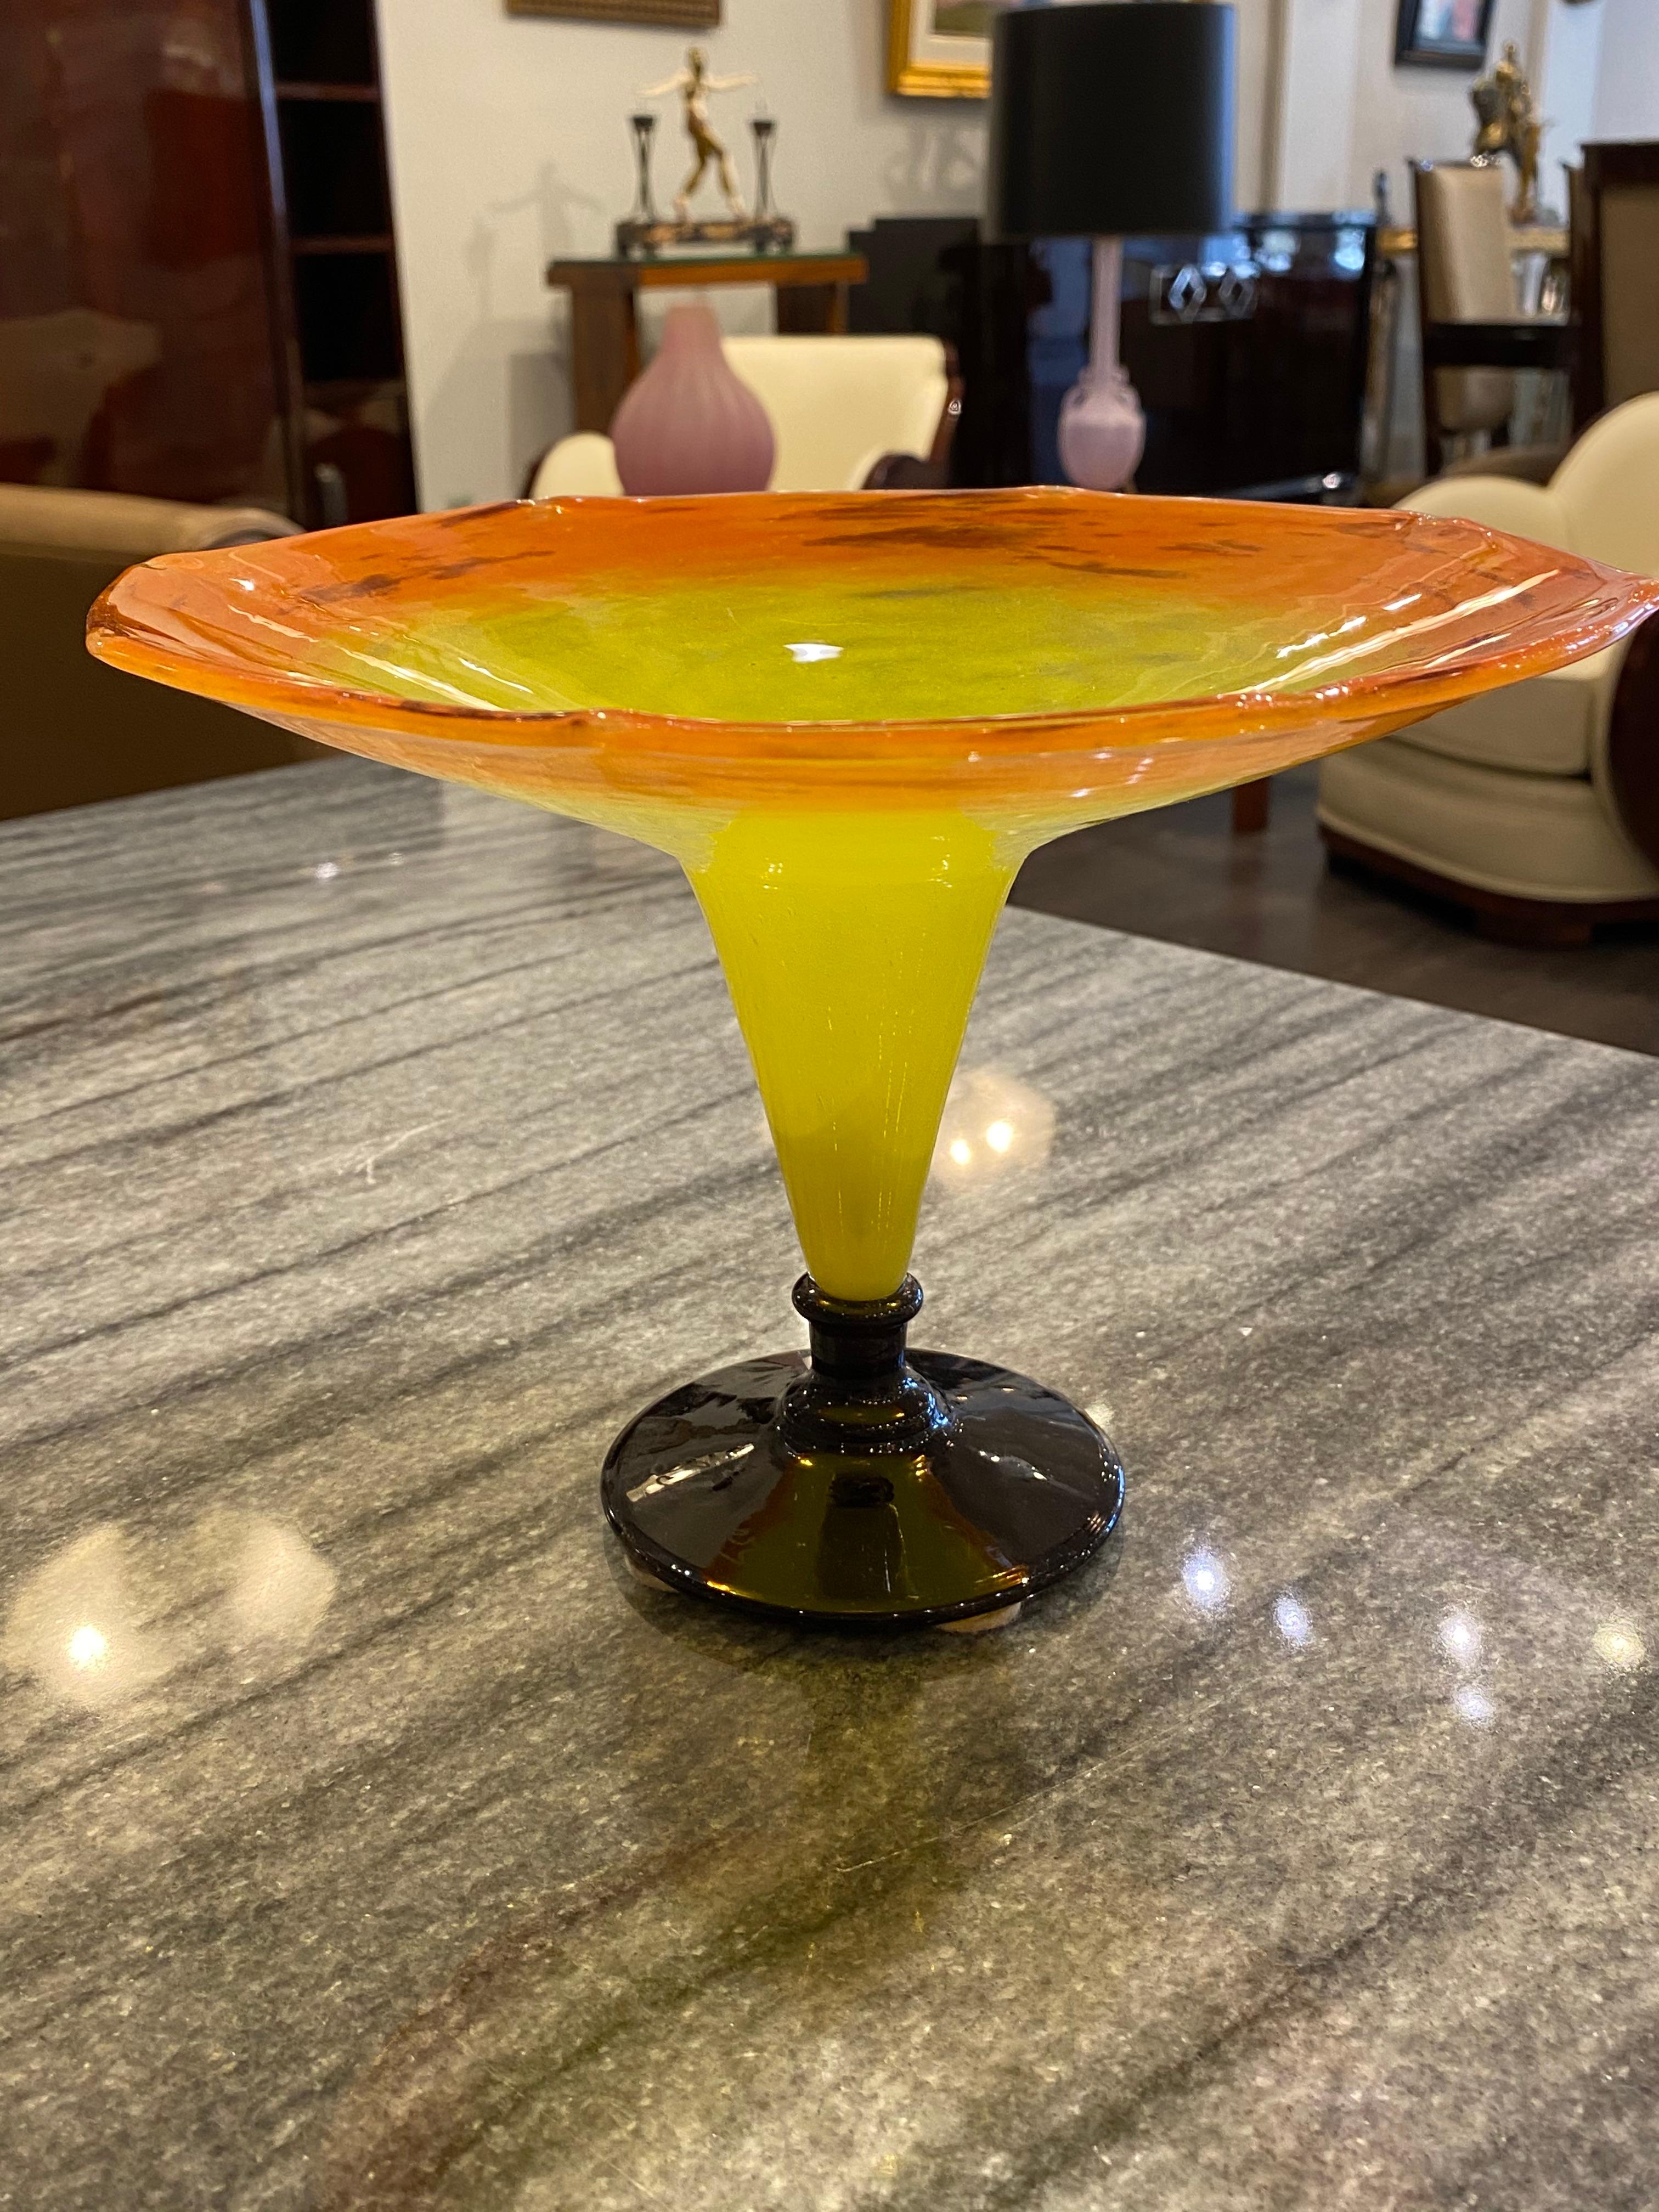 Art Deco glass tazza by Charles Schneider, in orange and bright yellow colors with a deep purple foot.
Made in France,
circa 1928
Signature: 